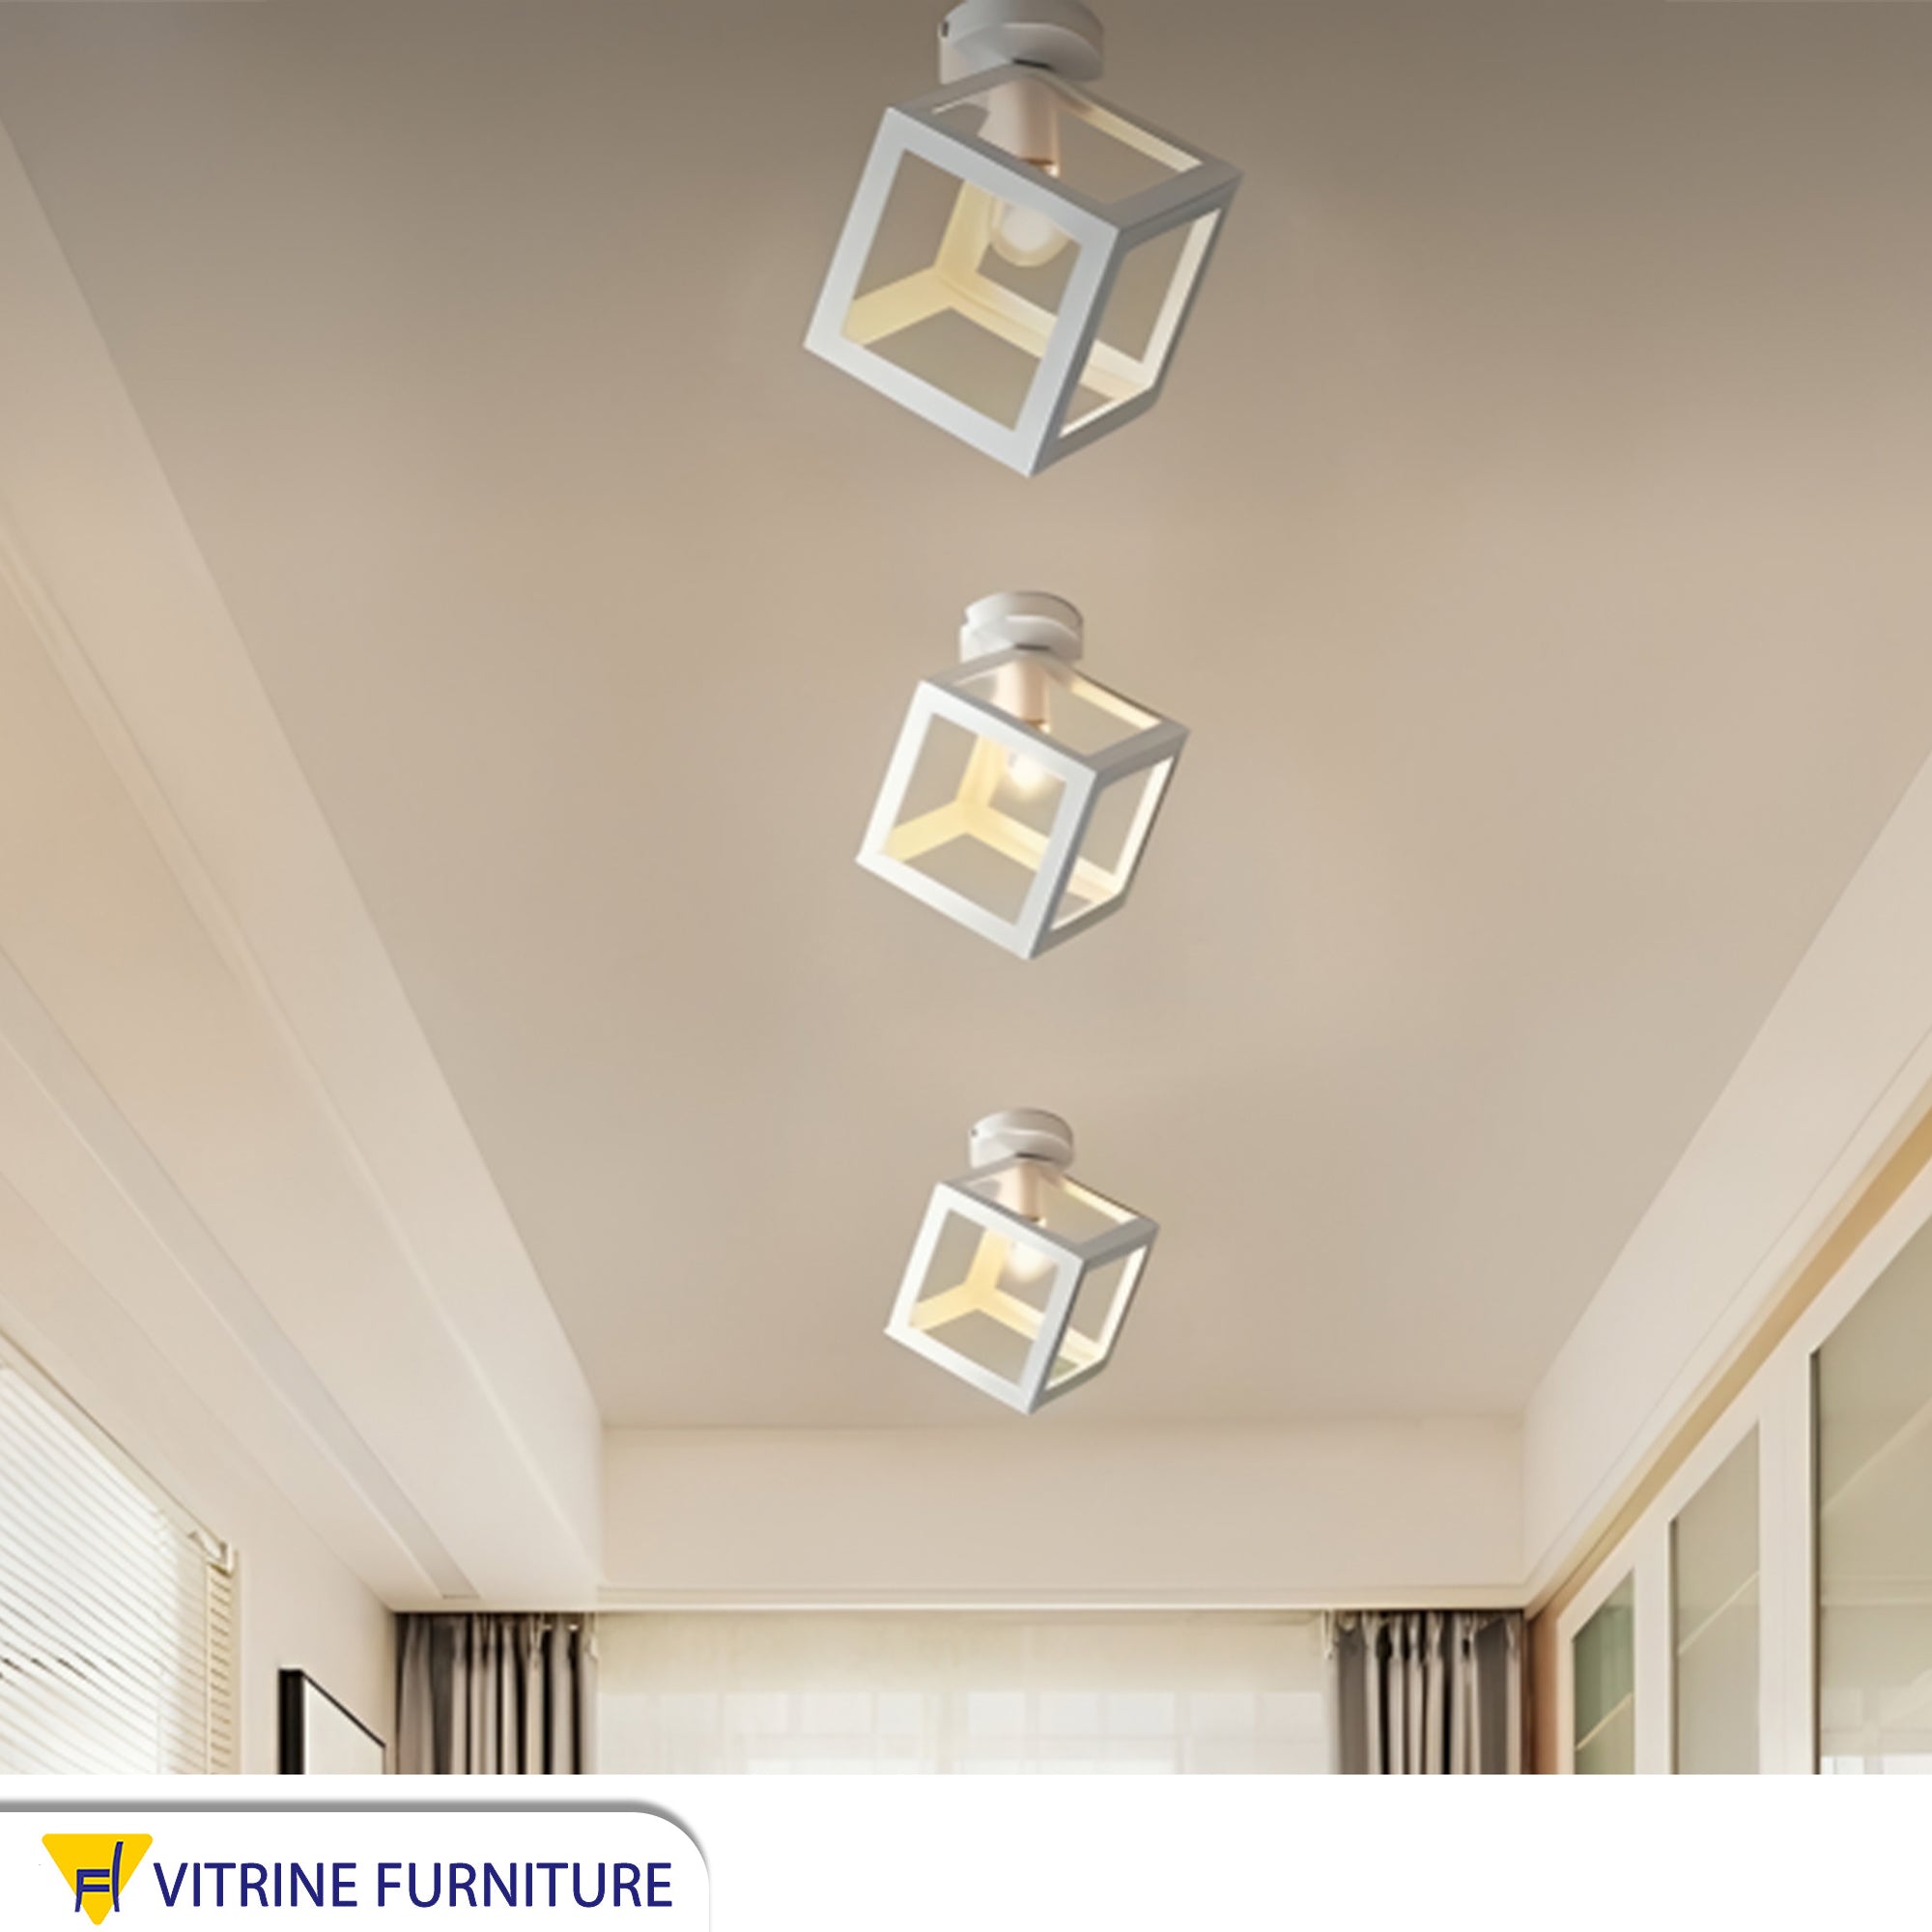 White metal lighting unit for the ceiling